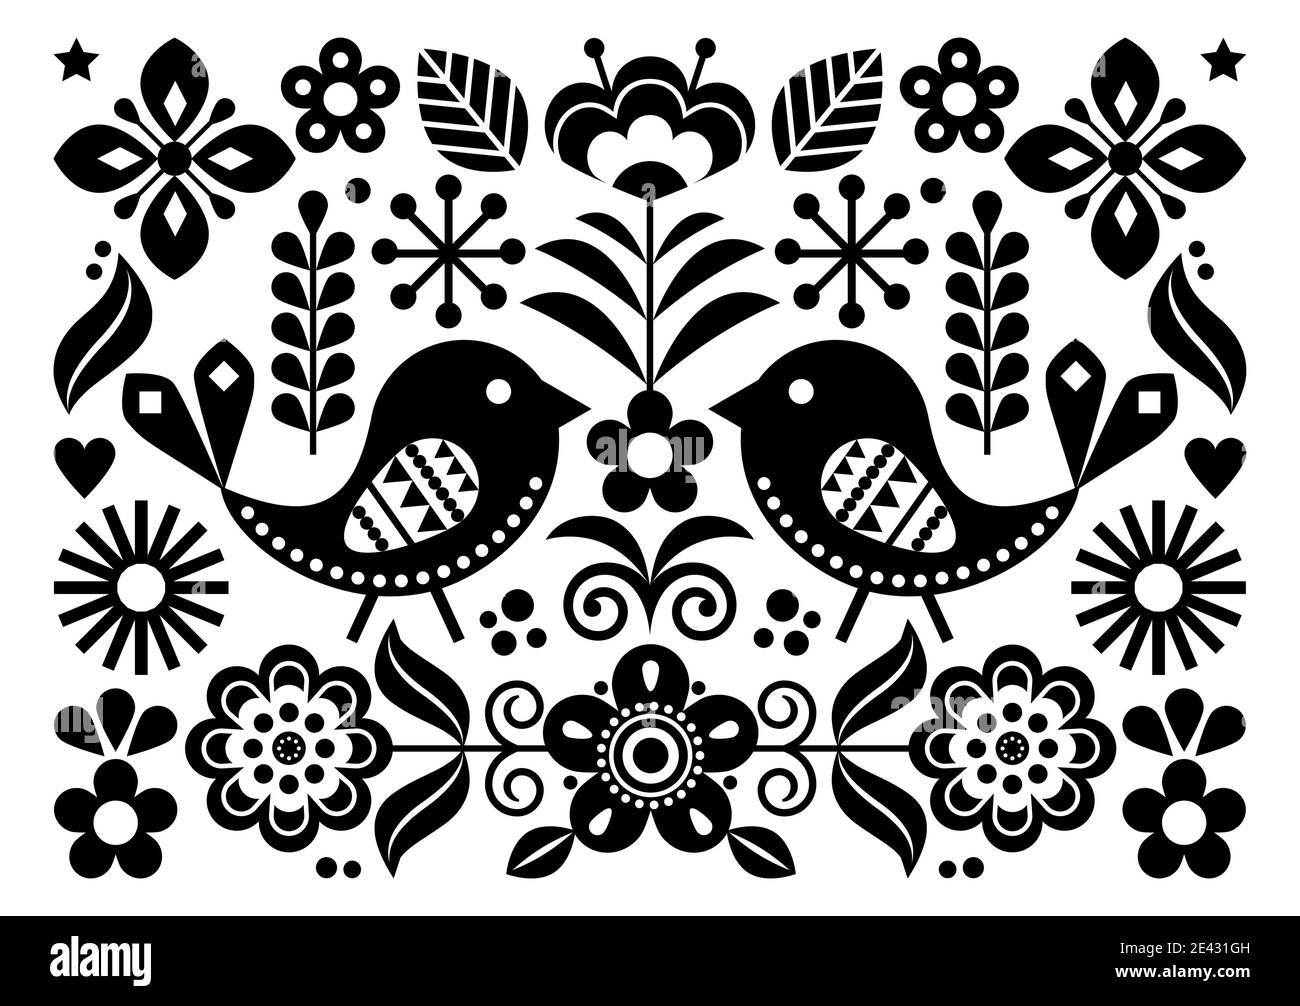 Scandinavian folk art vector cute floral pattern, greeting card or invitation A7 format black and white design with birds, flowers inspired by traditi Stock Vector